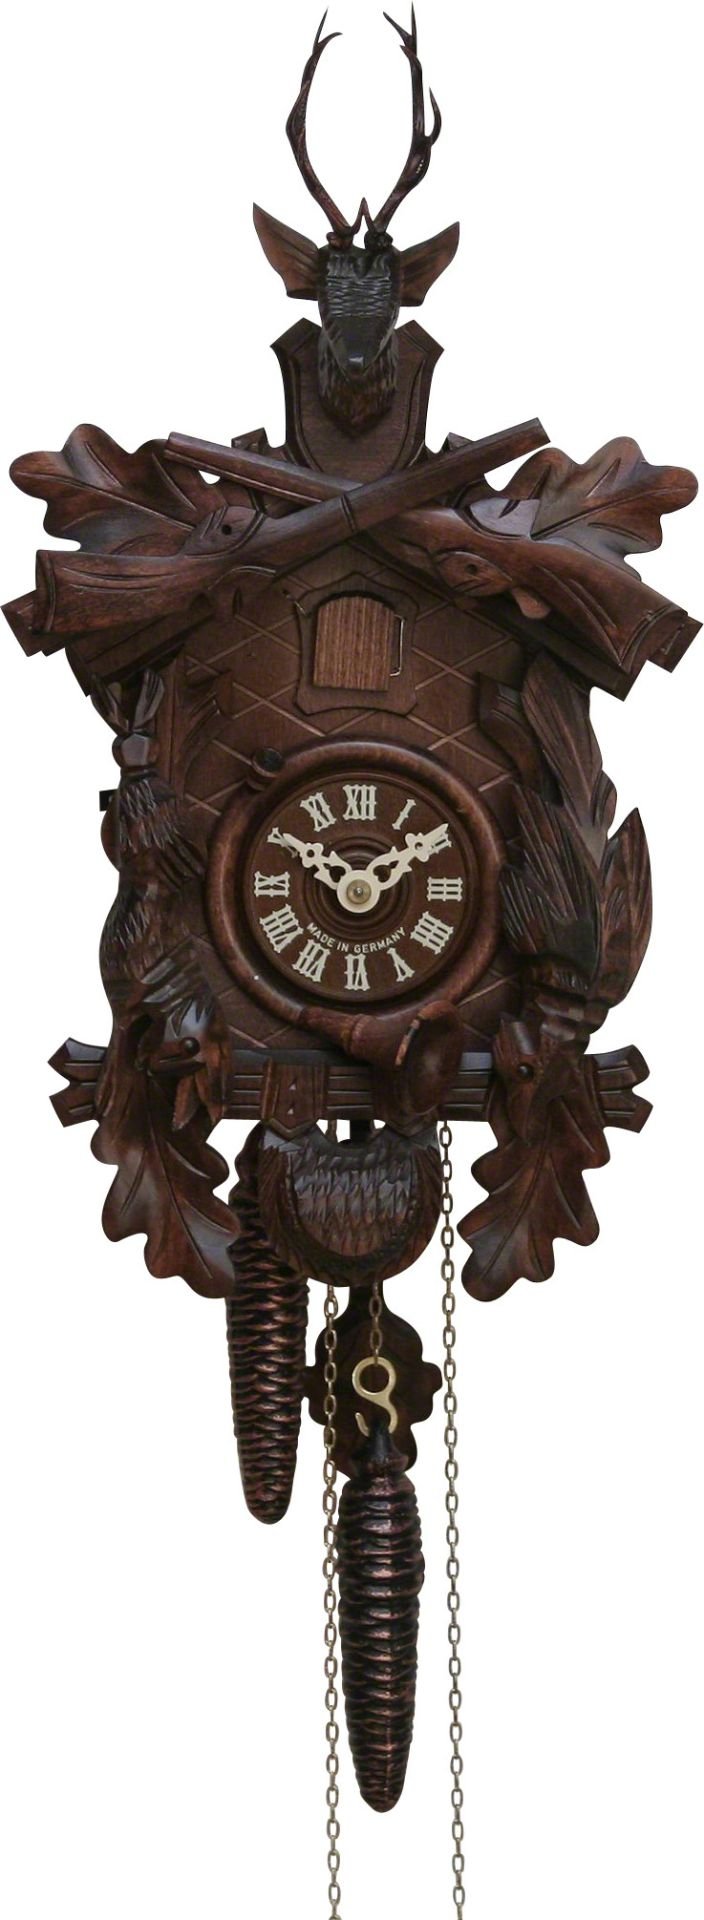 Cuckoo Clock Carved Style 8 Day Movement 58cm by Hekas